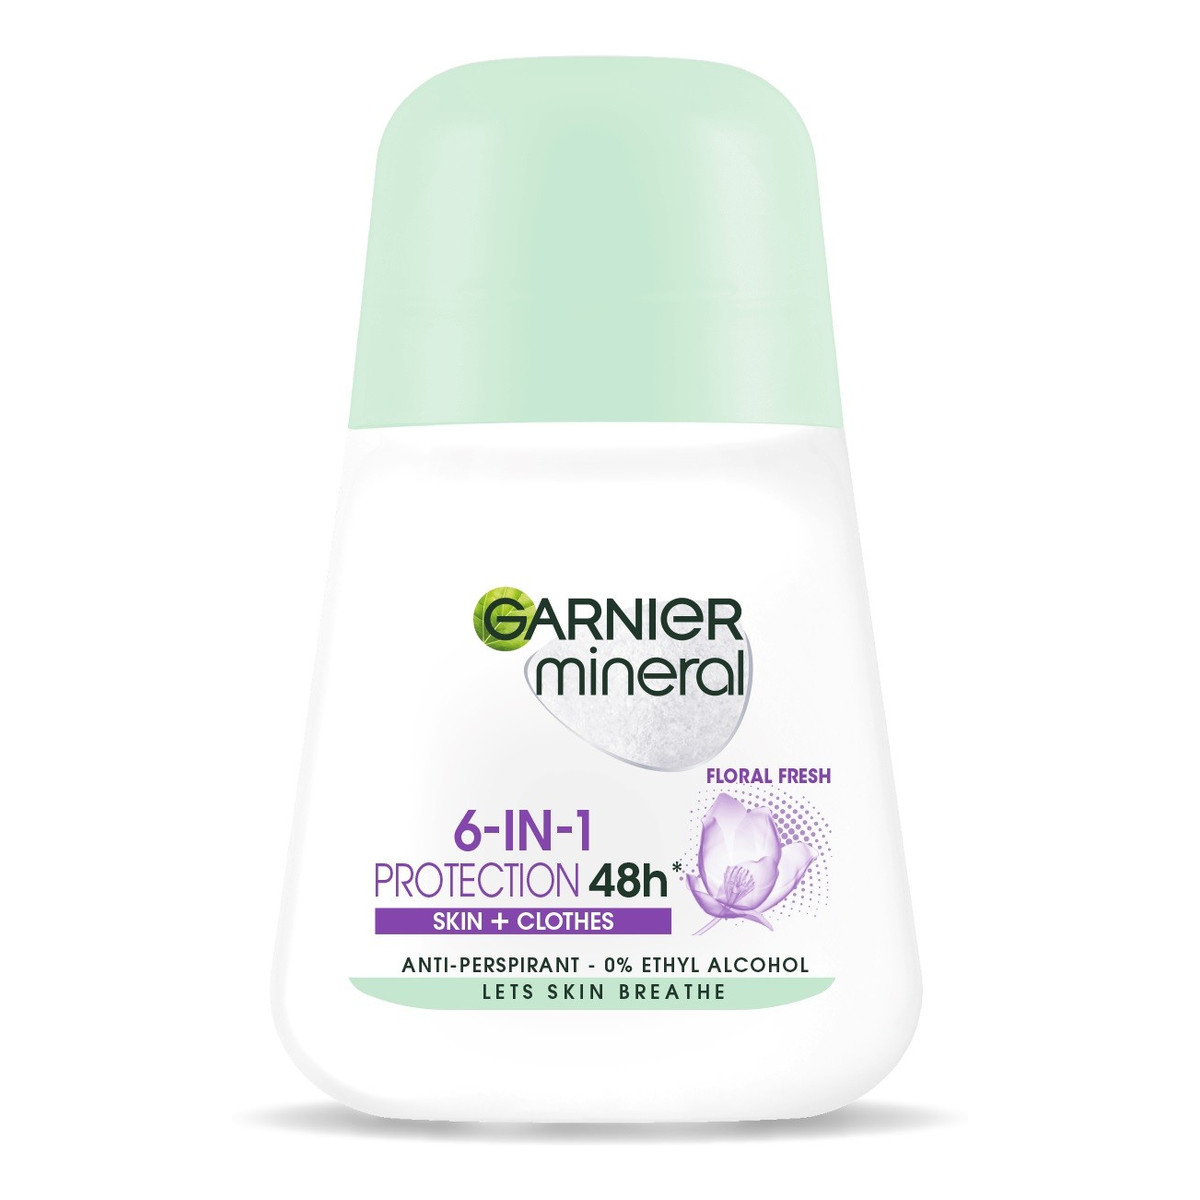 Garnier Mineral Dezodorant roll-on 6in1 Protection 48h Floral Fresh Skin+Clothes 50ml